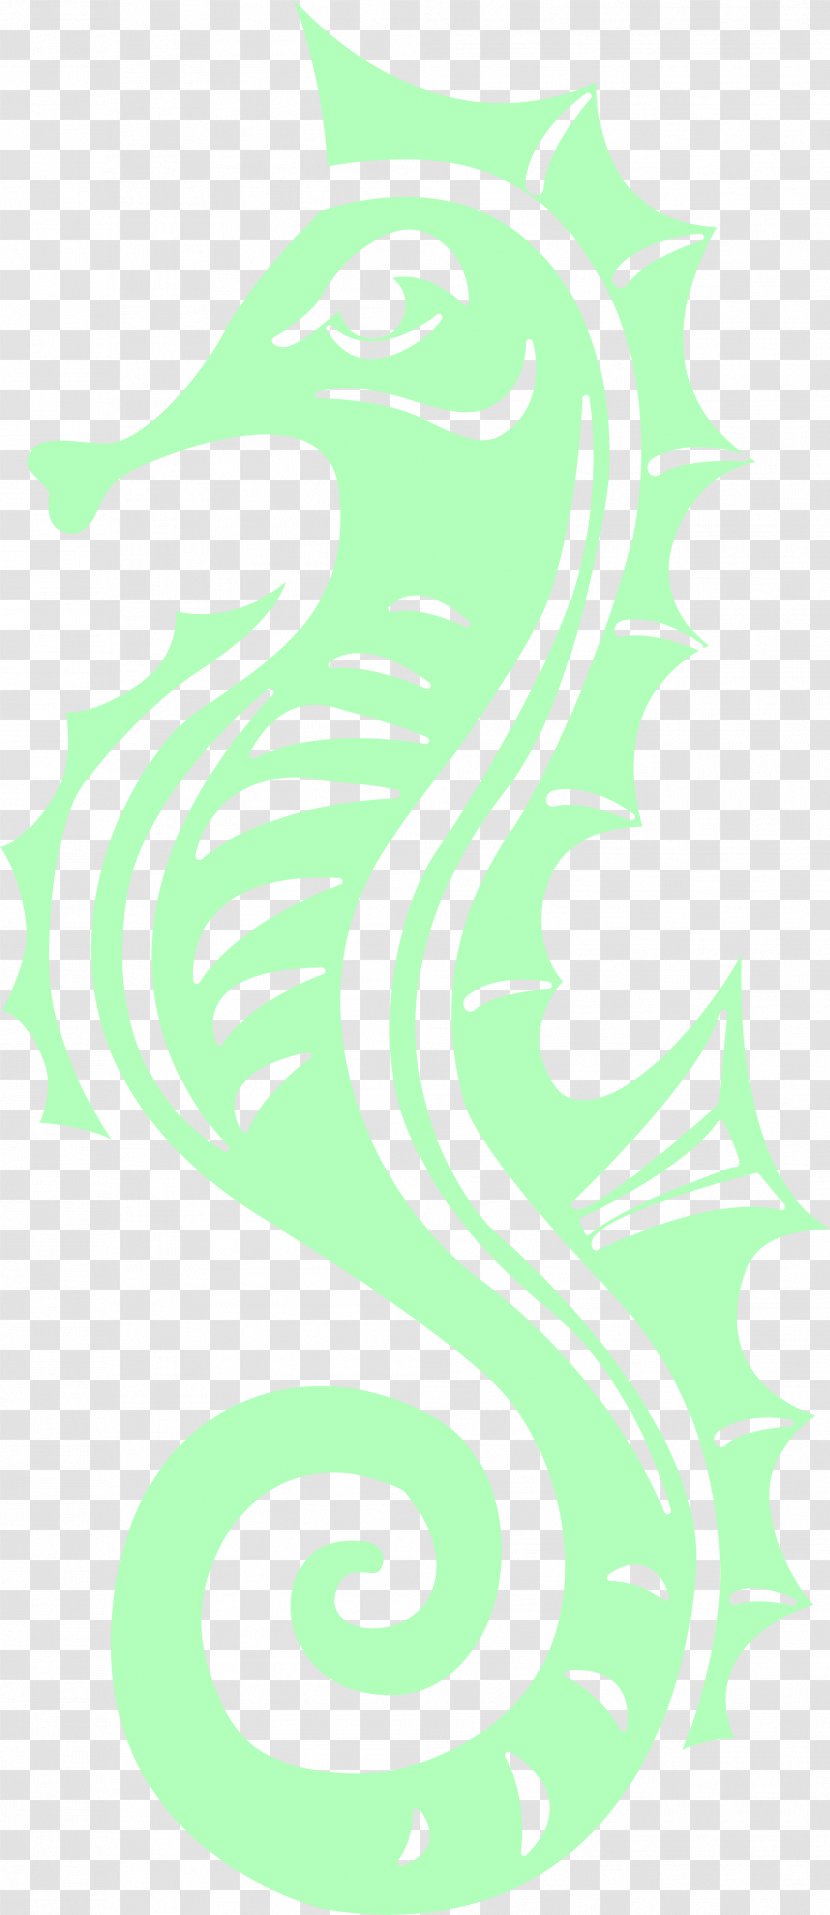 Seahorse Graphic Design Illustration - Fictional Character - Beautiful Green Transparent PNG